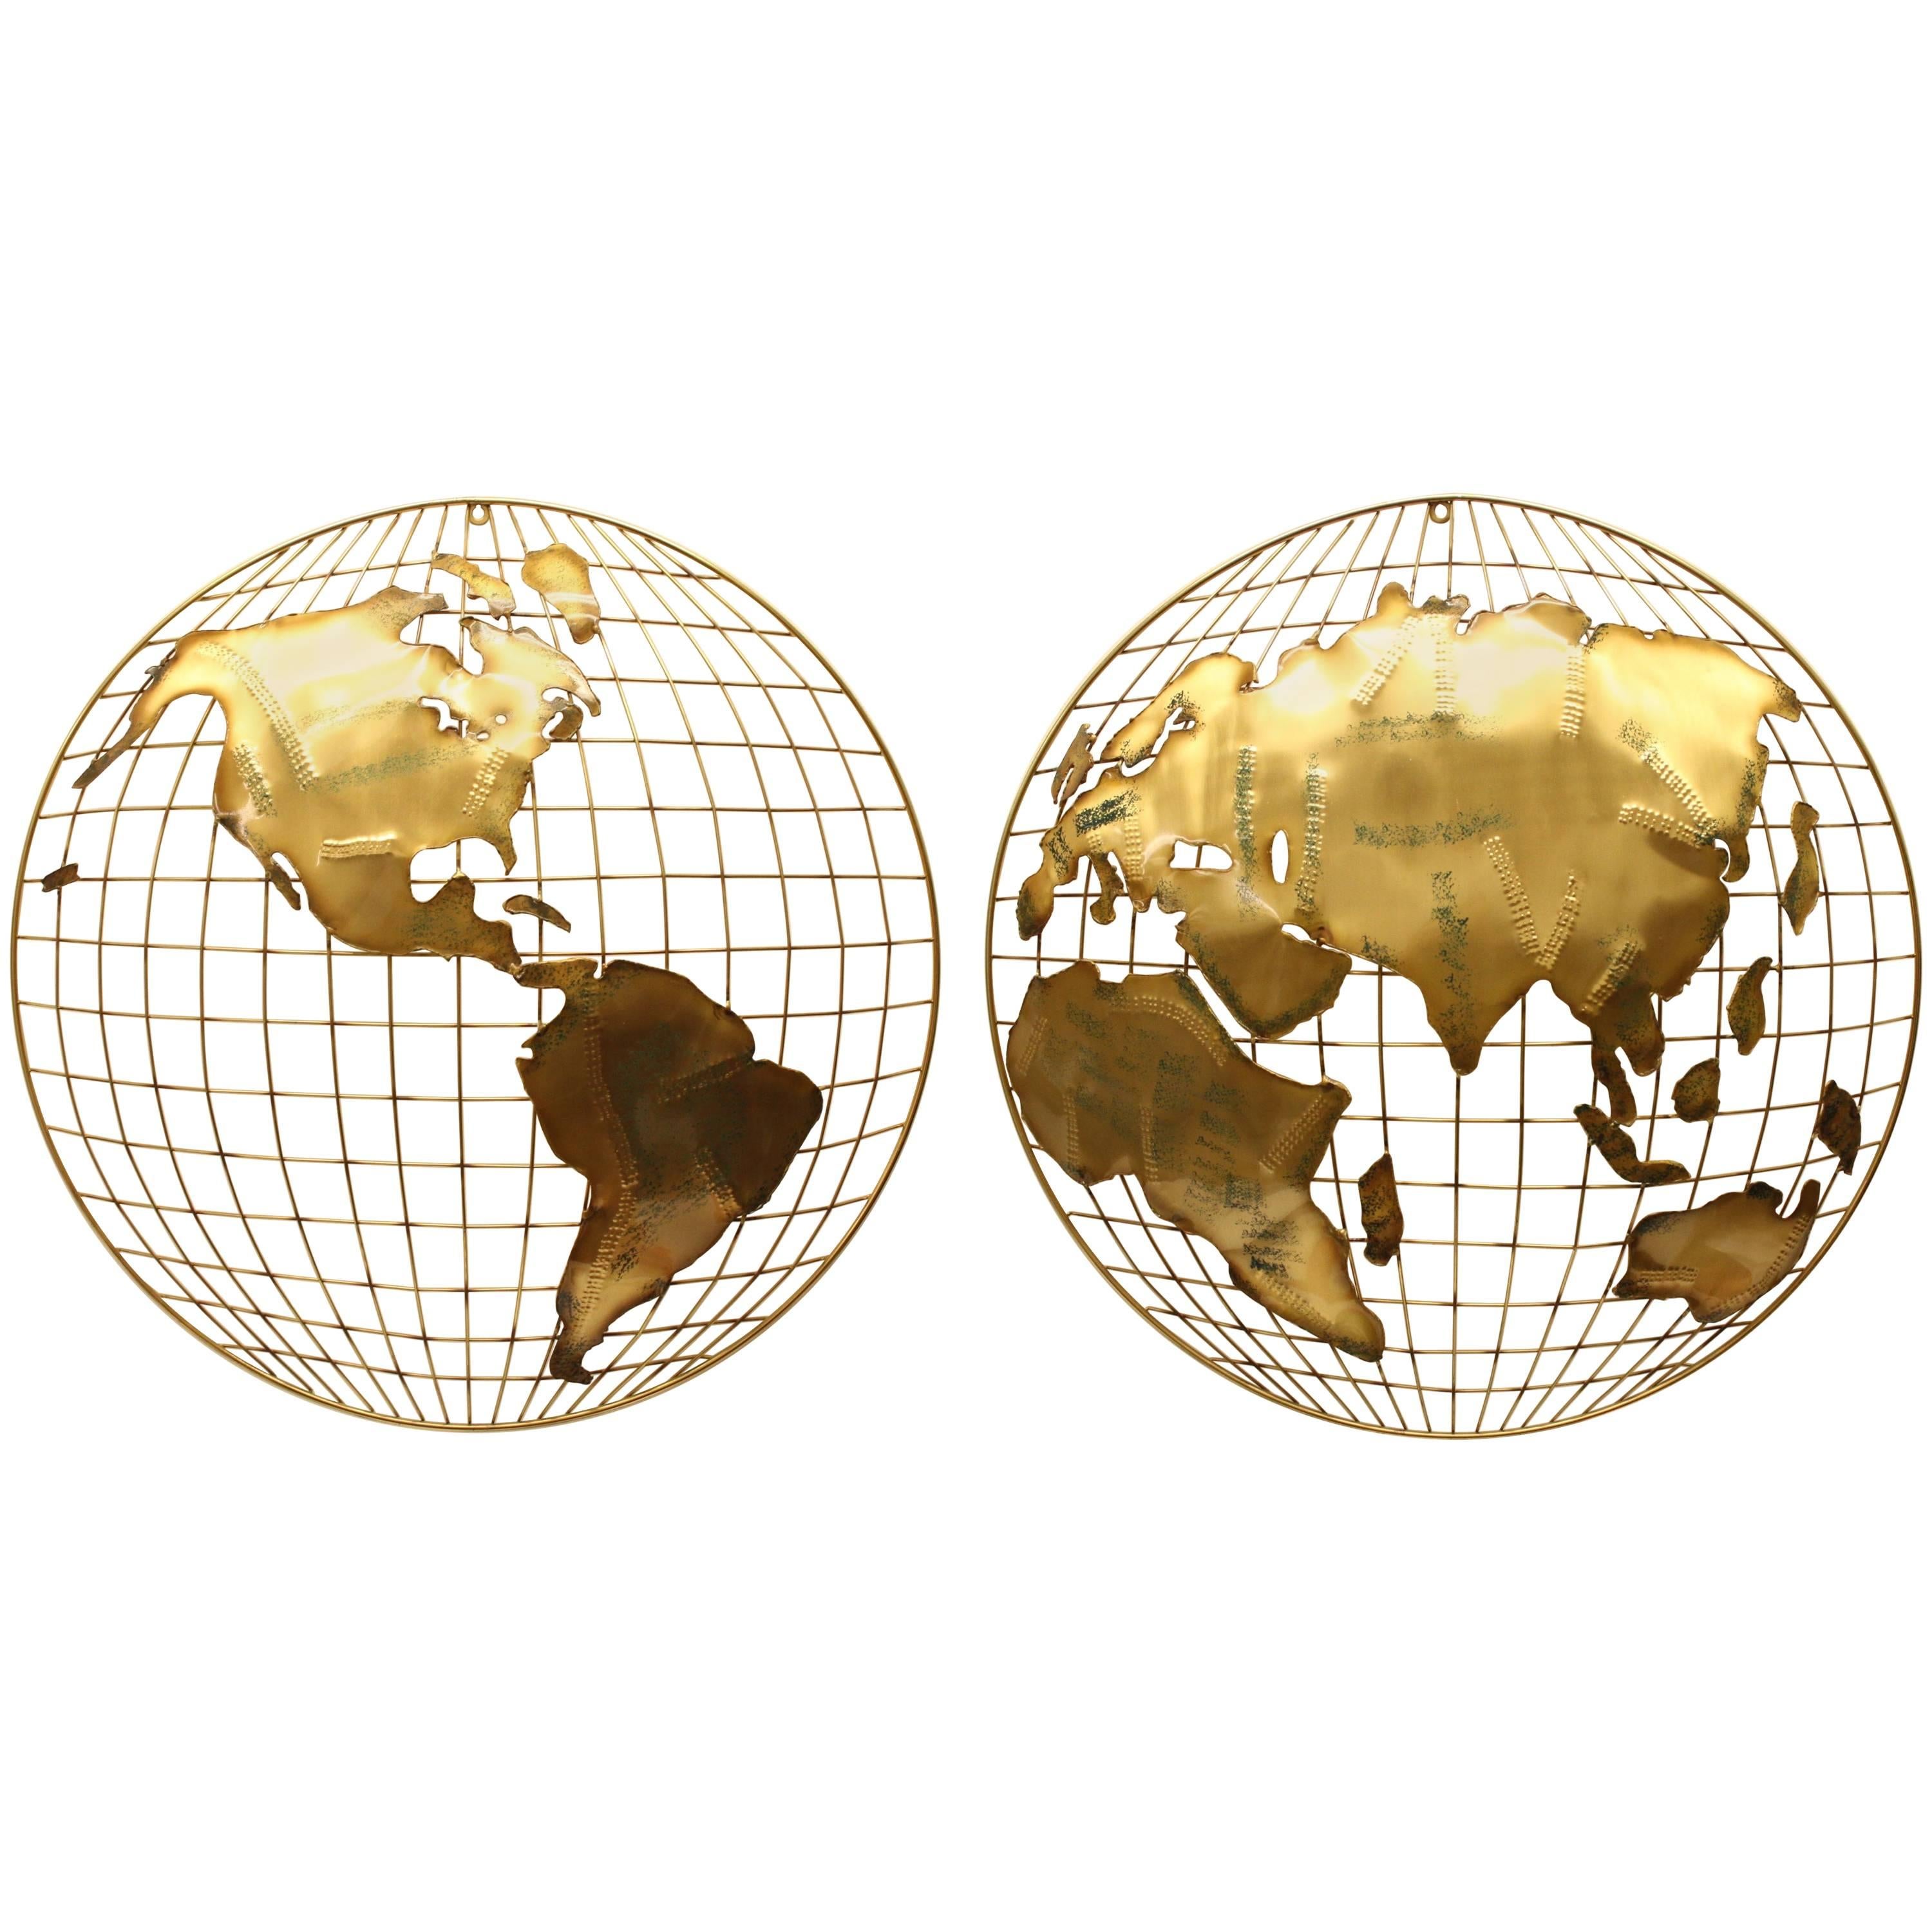 Pair of C. Jere Brass Globe Sphere Wall Sculptures, circa 1984 For Sale